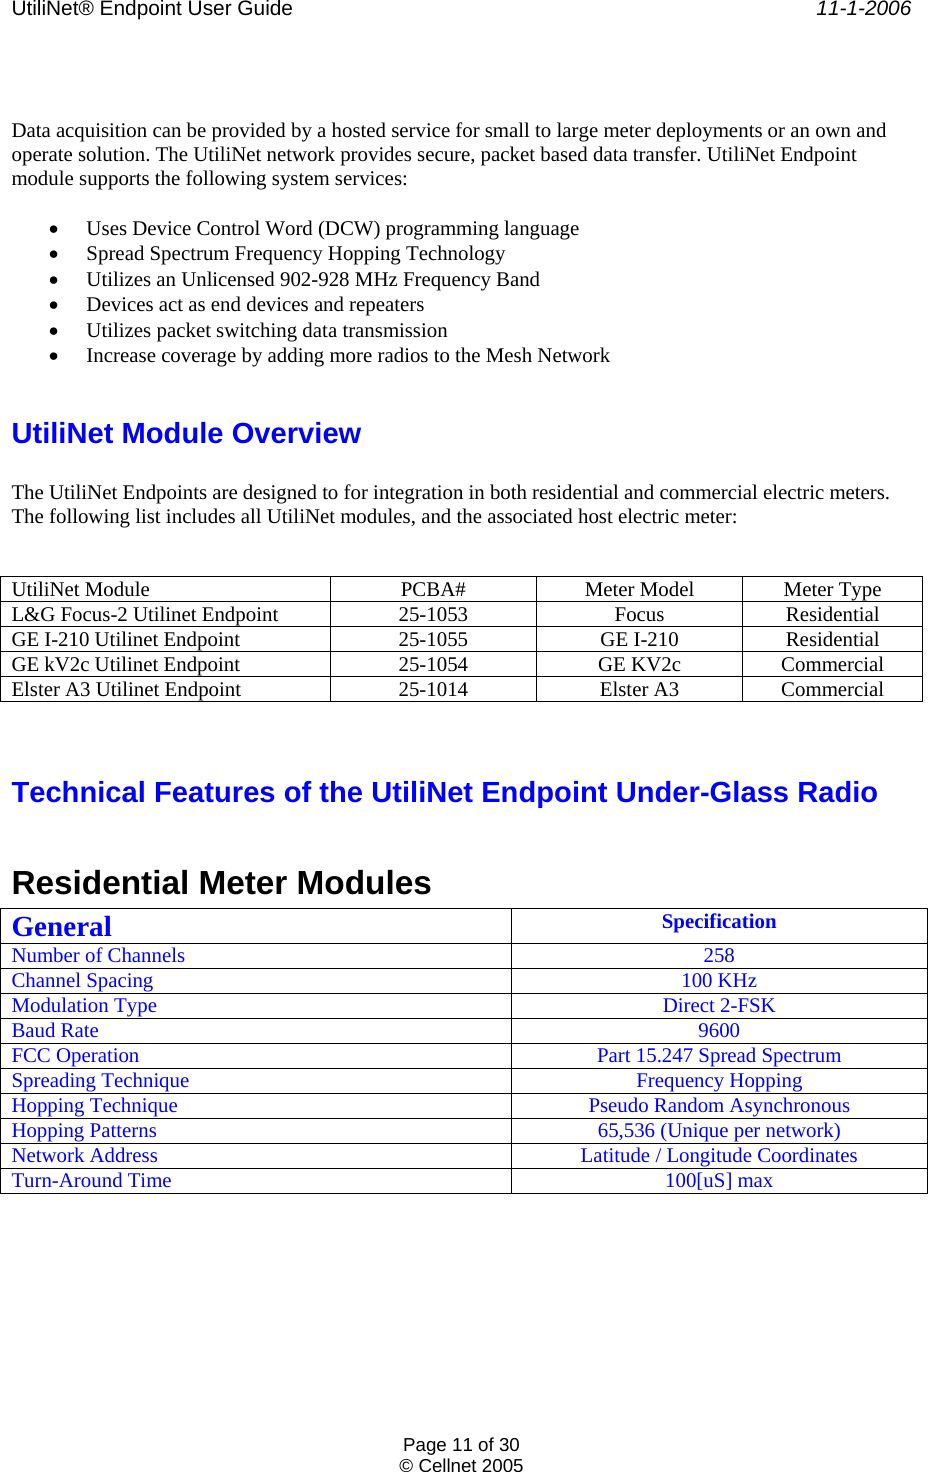 UtiliNet® Endpoint User Guide    11-1-2006 Page 11 of 30 © Cellnet 2005    Data acquisition can be provided by a hosted service for small to large meter deployments or an own and operate solution. The UtiliNet network provides secure, packet based data transfer. UtiliNet Endpoint module supports the following system services:  • Uses Device Control Word (DCW) programming language • Spread Spectrum Frequency Hopping Technology • Utilizes an Unlicensed 902-928 MHz Frequency Band • Devices act as end devices and repeaters • Utilizes packet switching data transmission • Increase coverage by adding more radios to the Mesh Network  UtiliNet Module Overview  The UtiliNet Endpoints are designed to for integration in both residential and commercial electric meters. The following list includes all UtiliNet modules, and the associated host electric meter:    UtiliNet Module PCBA# Meter Model Meter Type L&amp;G Focus-2 Utilinet Endpoint 25-1053 Focus Residential GE I-210 Utilinet Endpoint 25-1055 GE I-210 Residential GE kV2c Utilinet Endpoint 25-1054 GE KV2c Commercial Elster A3 Utilinet Endpoint 25-1014 Elster A3 Commercial   Technical Features of the UtiliNet Endpoint Under-Glass Radio  Residential Meter Modules General  Specification Number of Channels  258 Channel Spacing  100 KHz Modulation Type  Direct 2-FSK Baud Rate  9600 FCC Operation  Part 15.247 Spread Spectrum Spreading Technique  Frequency Hopping Hopping Technique  Pseudo Random Asynchronous Hopping Patterns  65,536 (Unique per network) Network Address  Latitude / Longitude Coordinates Turn-Around Time  100[uS] max 